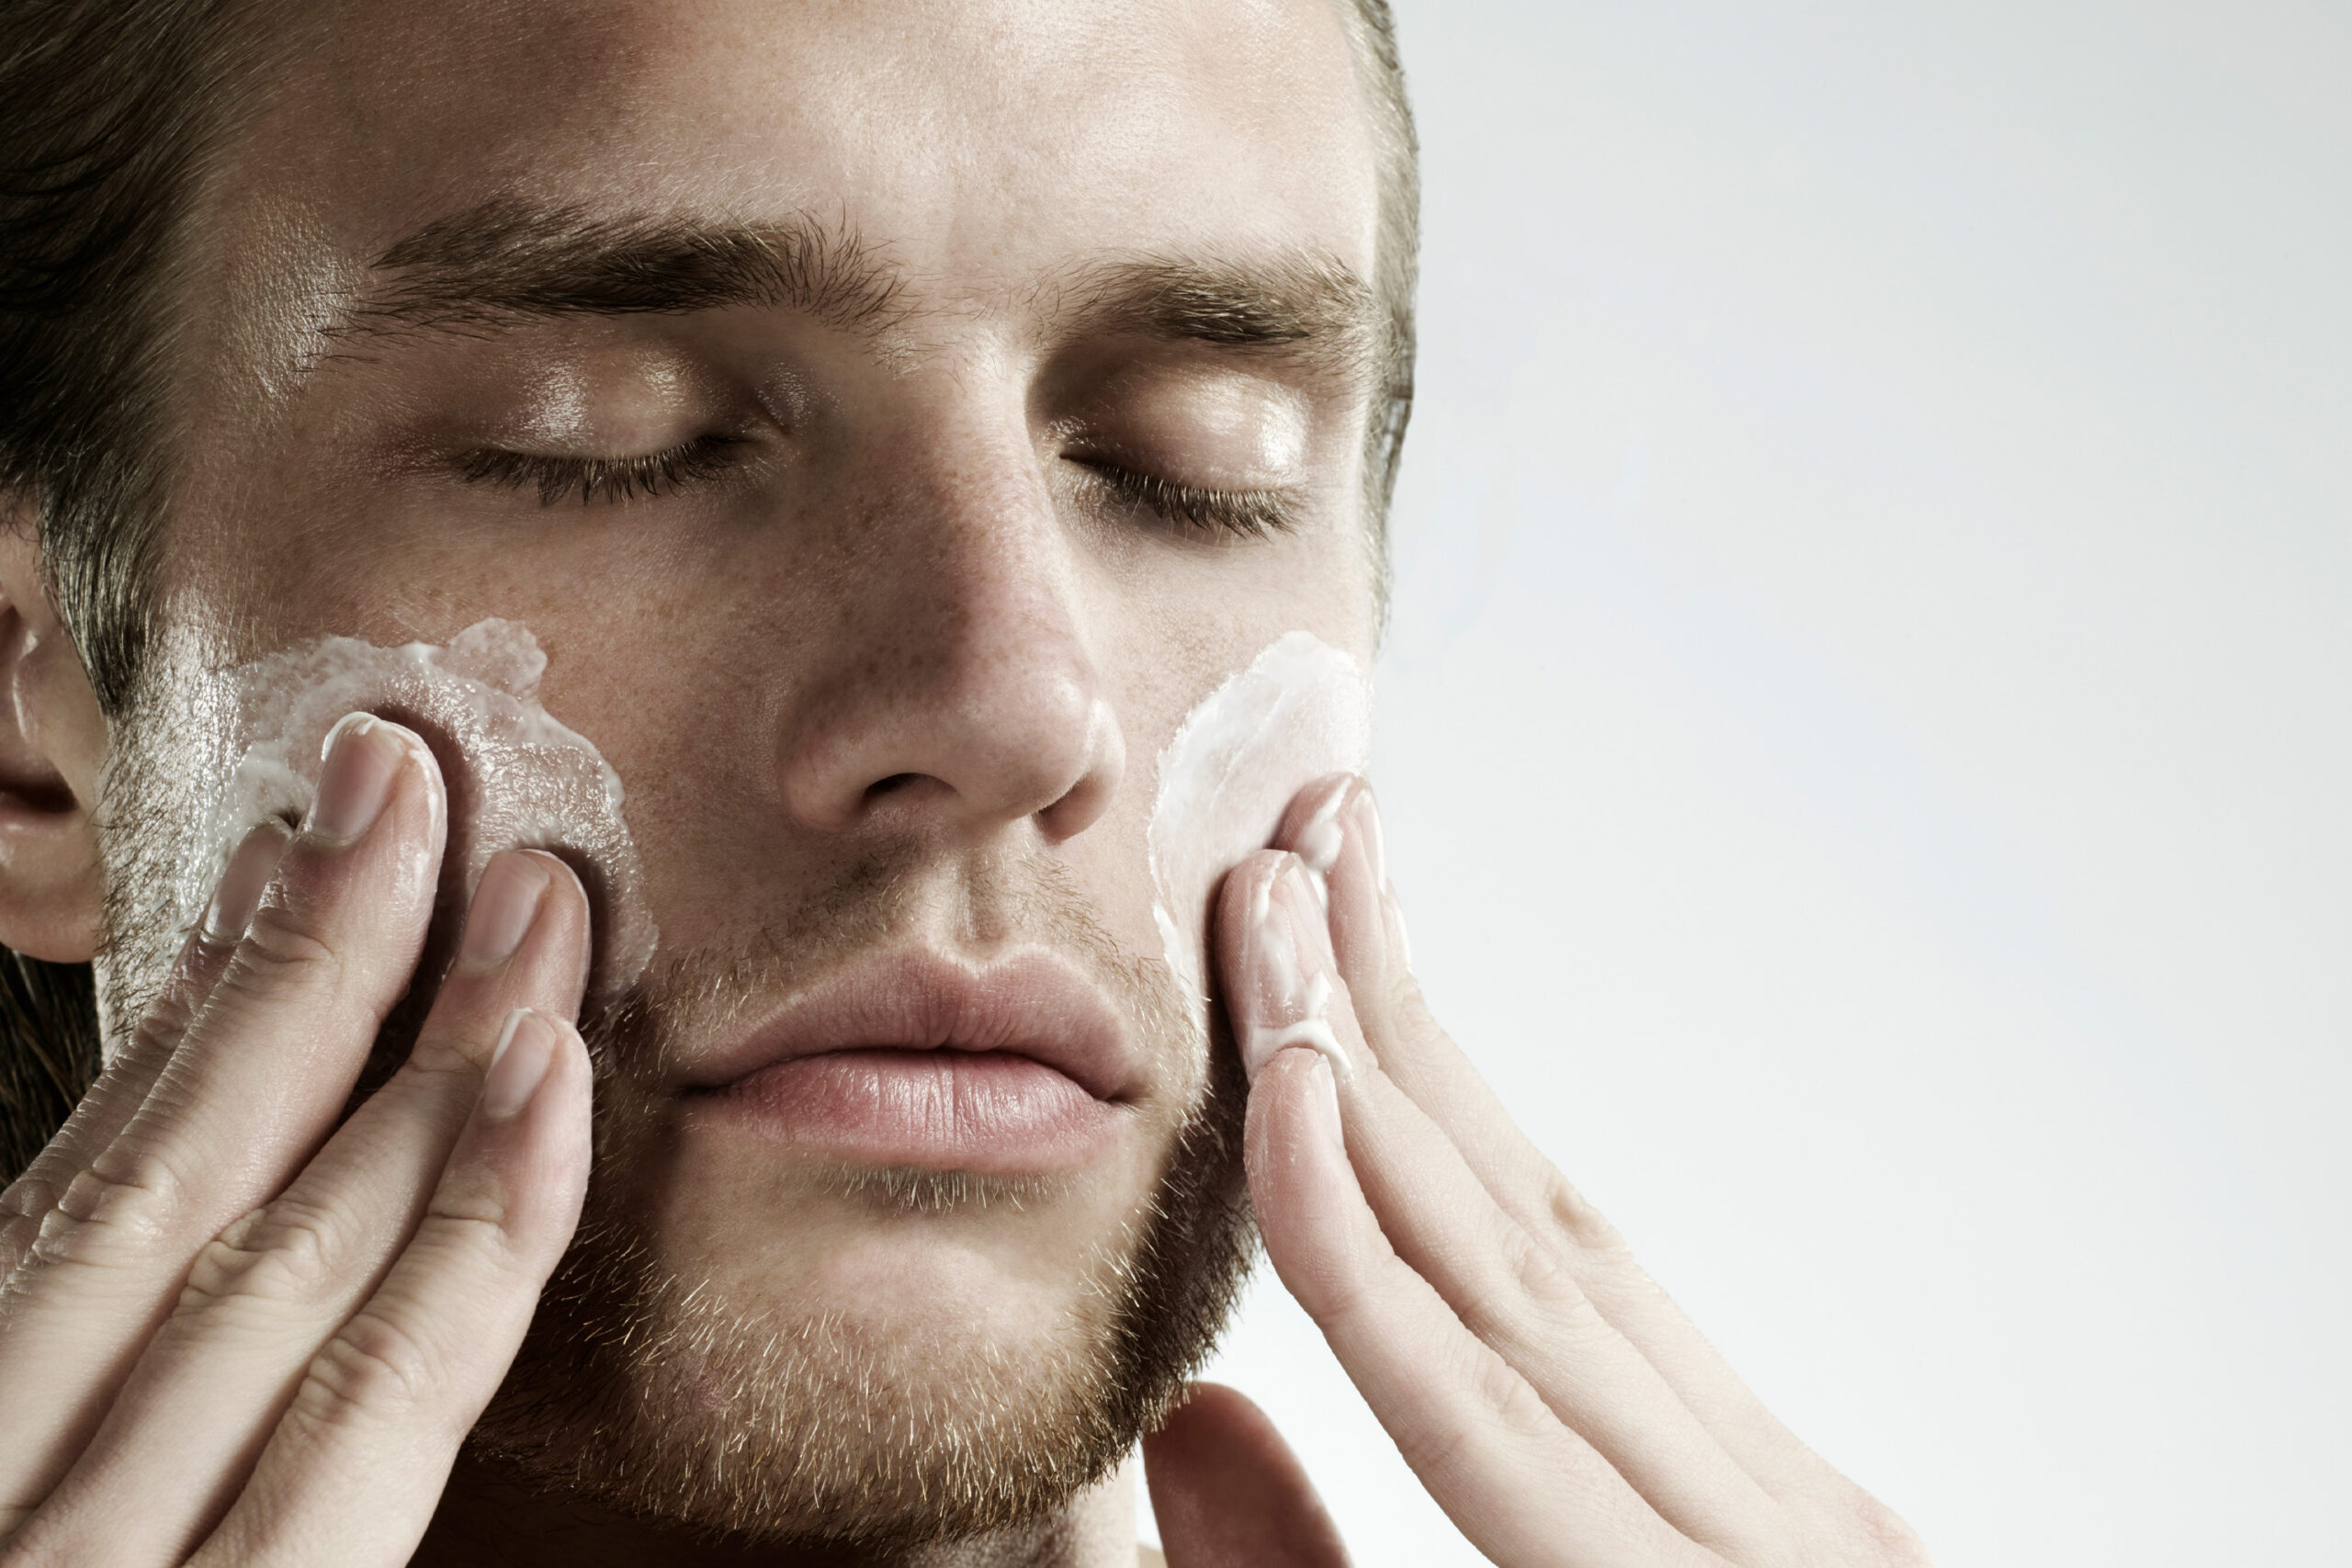 , 16 Dermatologists Share Their Number-One Skin Tip for Men